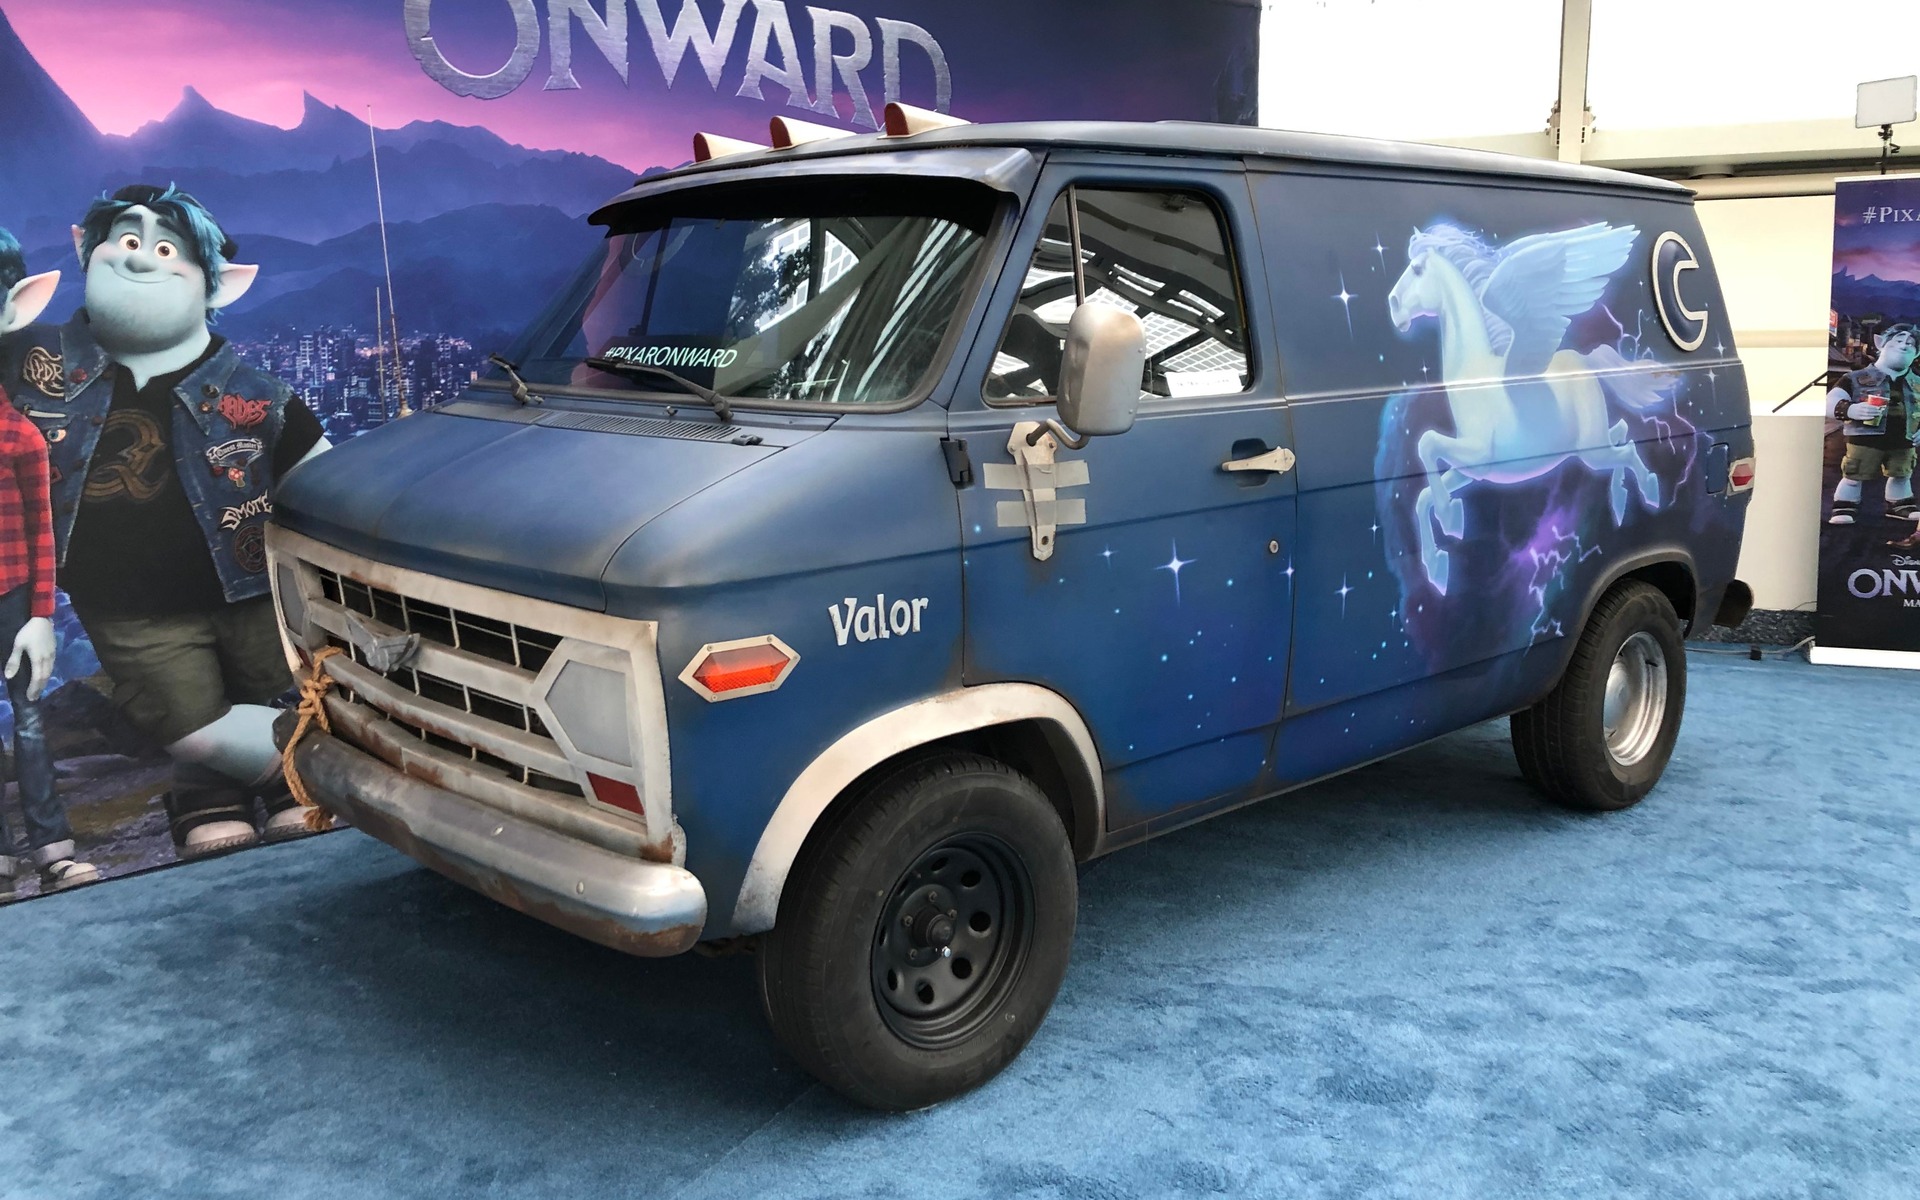 <p><strong>Van from the movie "Onward"</strong></p>